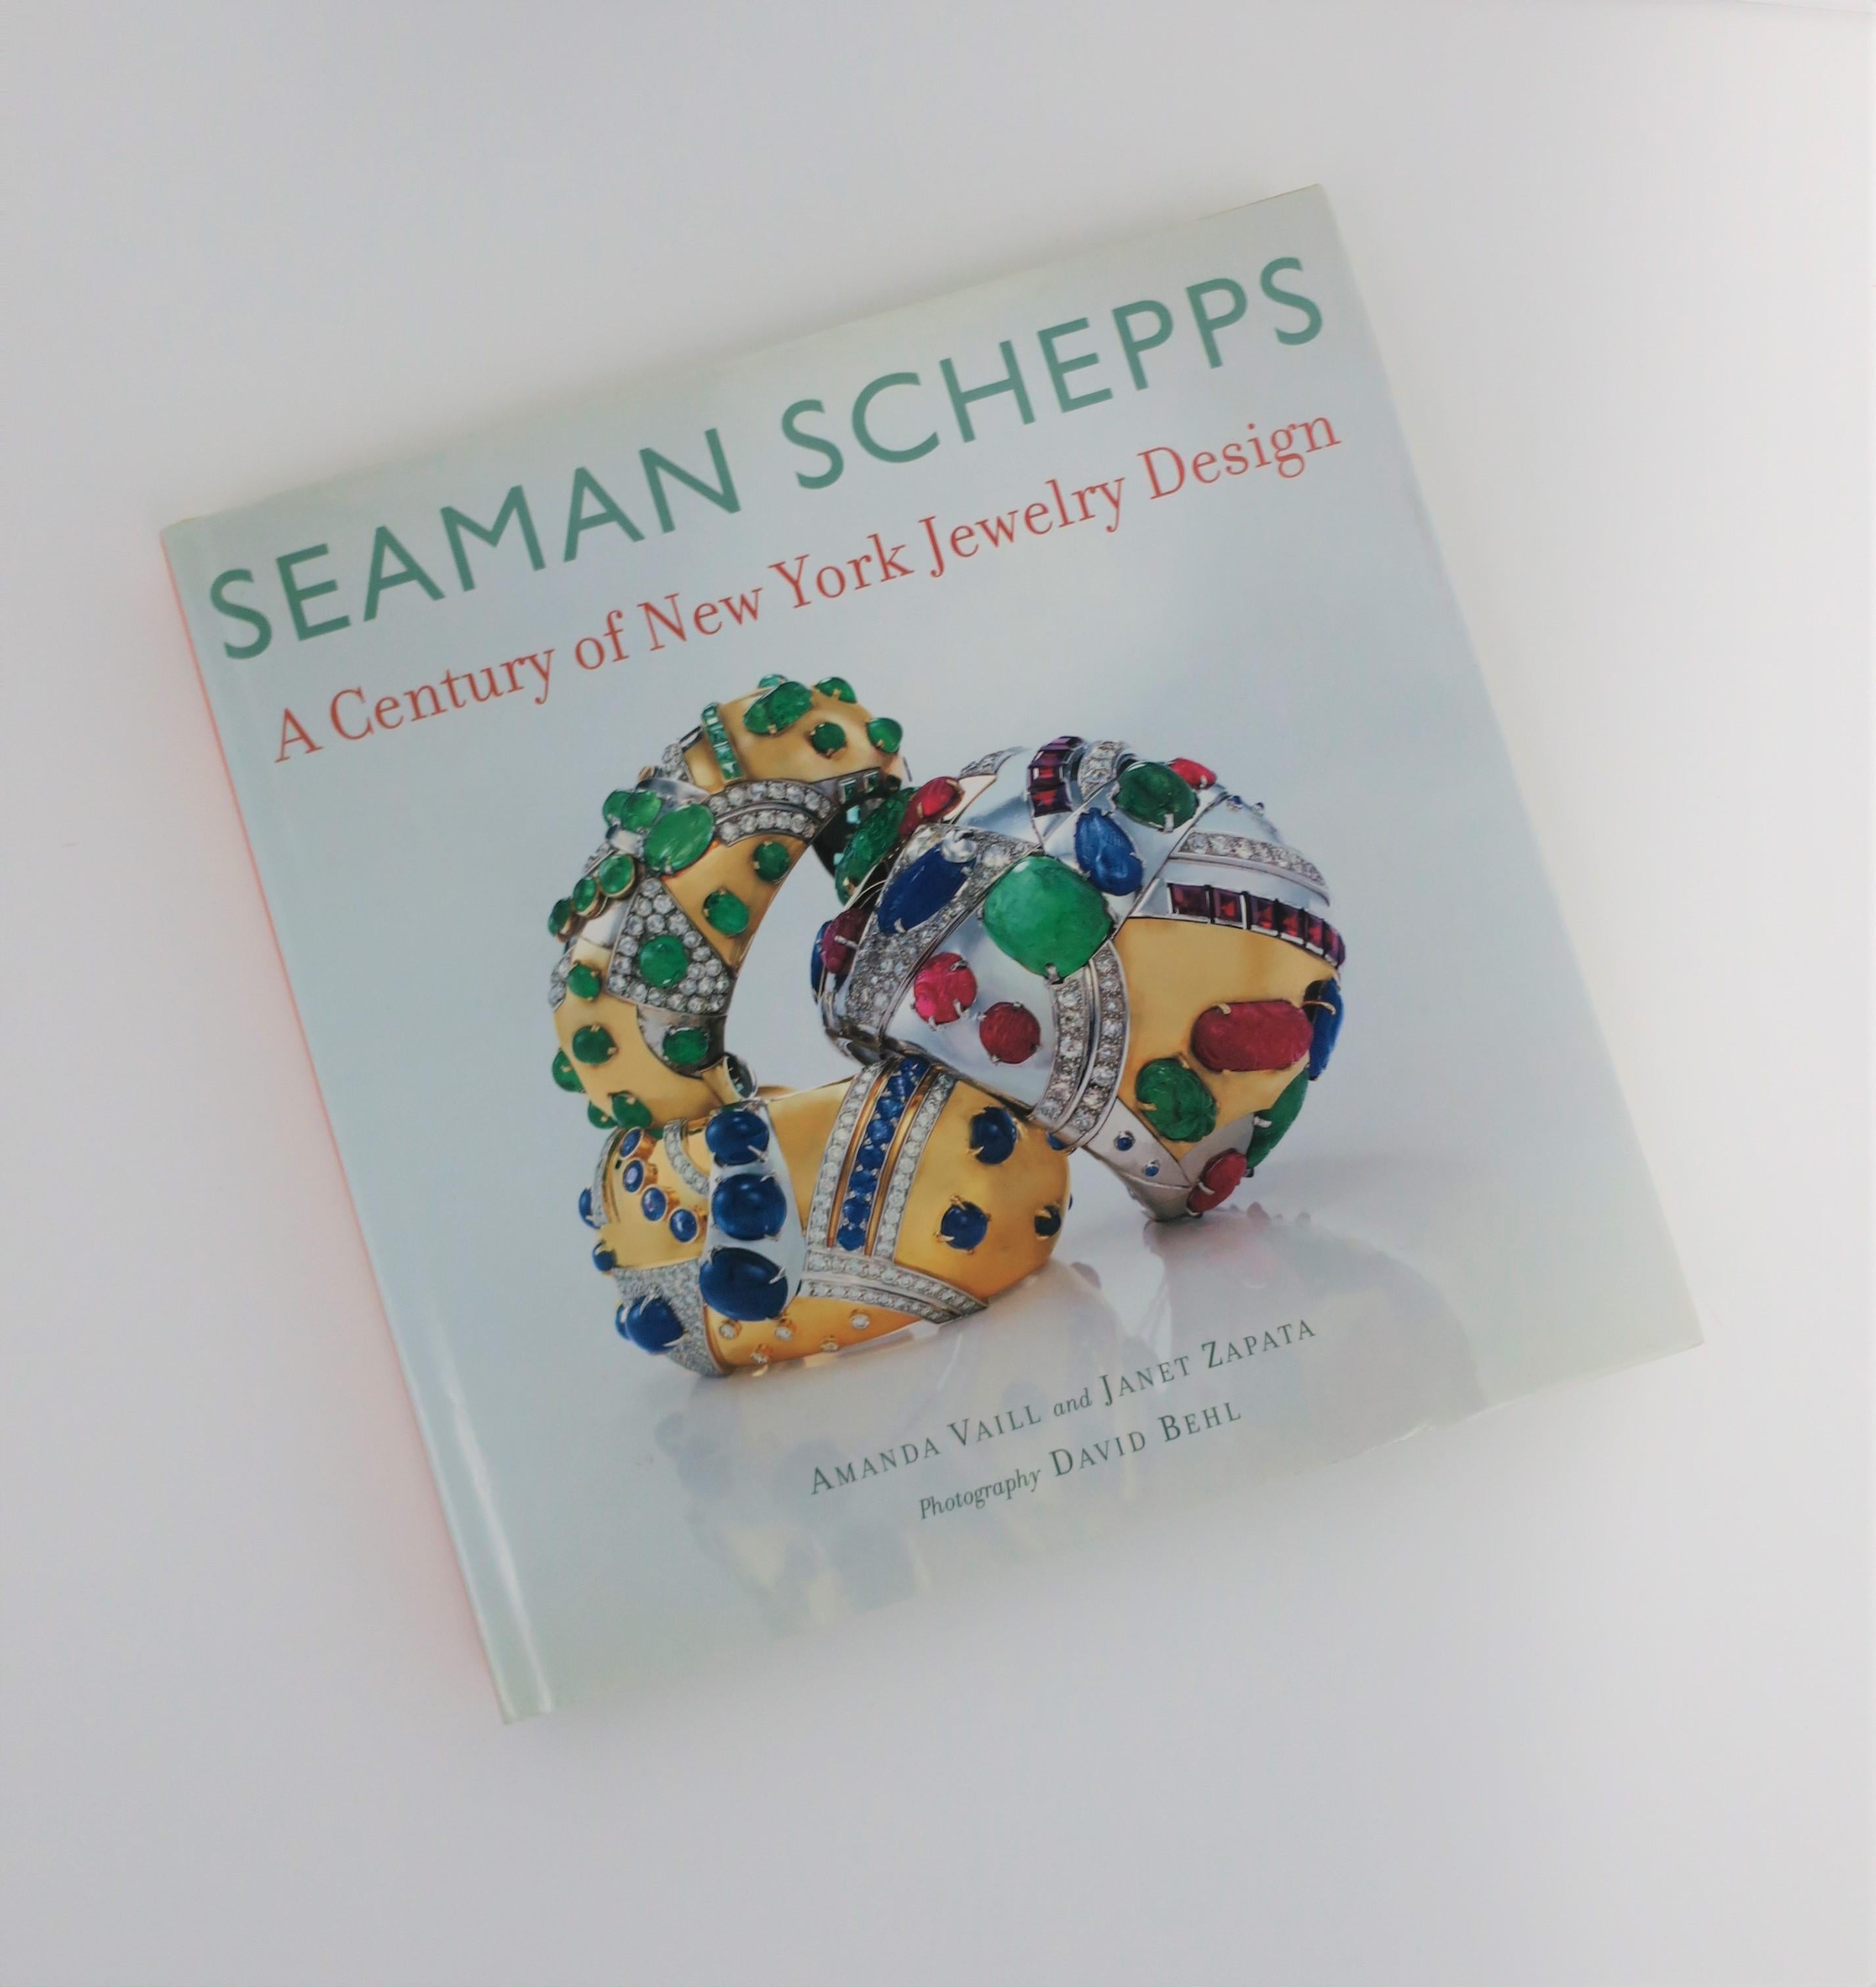 'Seaman Schepps, A Century of New York Jewelry Design', a gorgeous coffee table or library book on this iconic American jewelry maker/designer who grew up in New York's LES (Lower East Side) neighbourhood early 20th century.

Publisher: Vendome